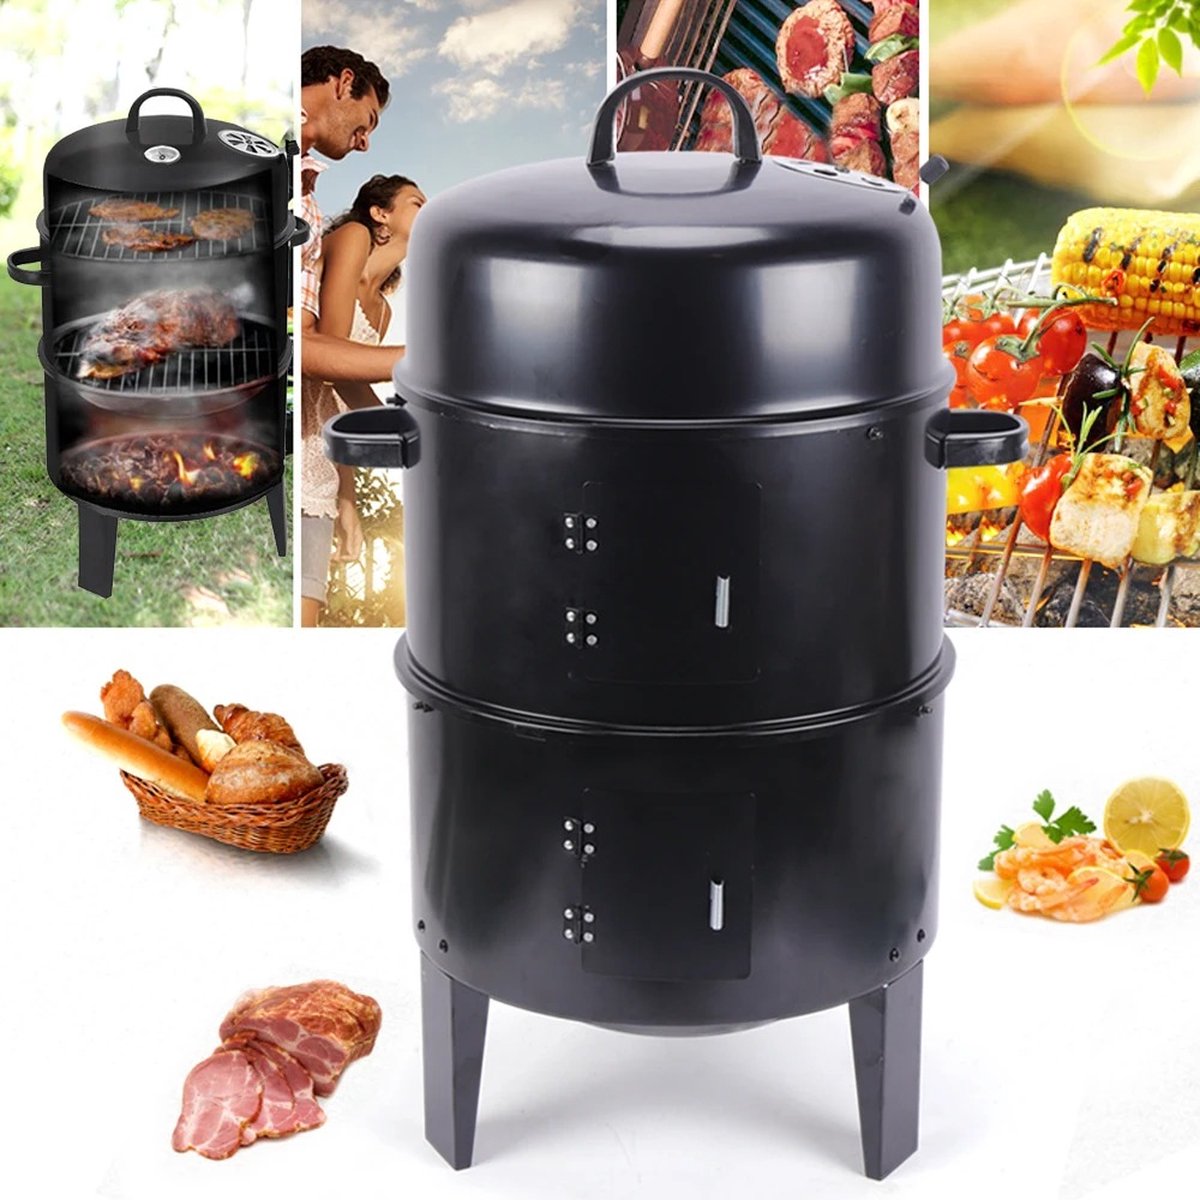 BolGalaxy BBQ - Smoker bbq - Grill - Barbecue - Rookoven - Houtskool - Voor Tuin, Camping - Ronde Barbeque - Zwart